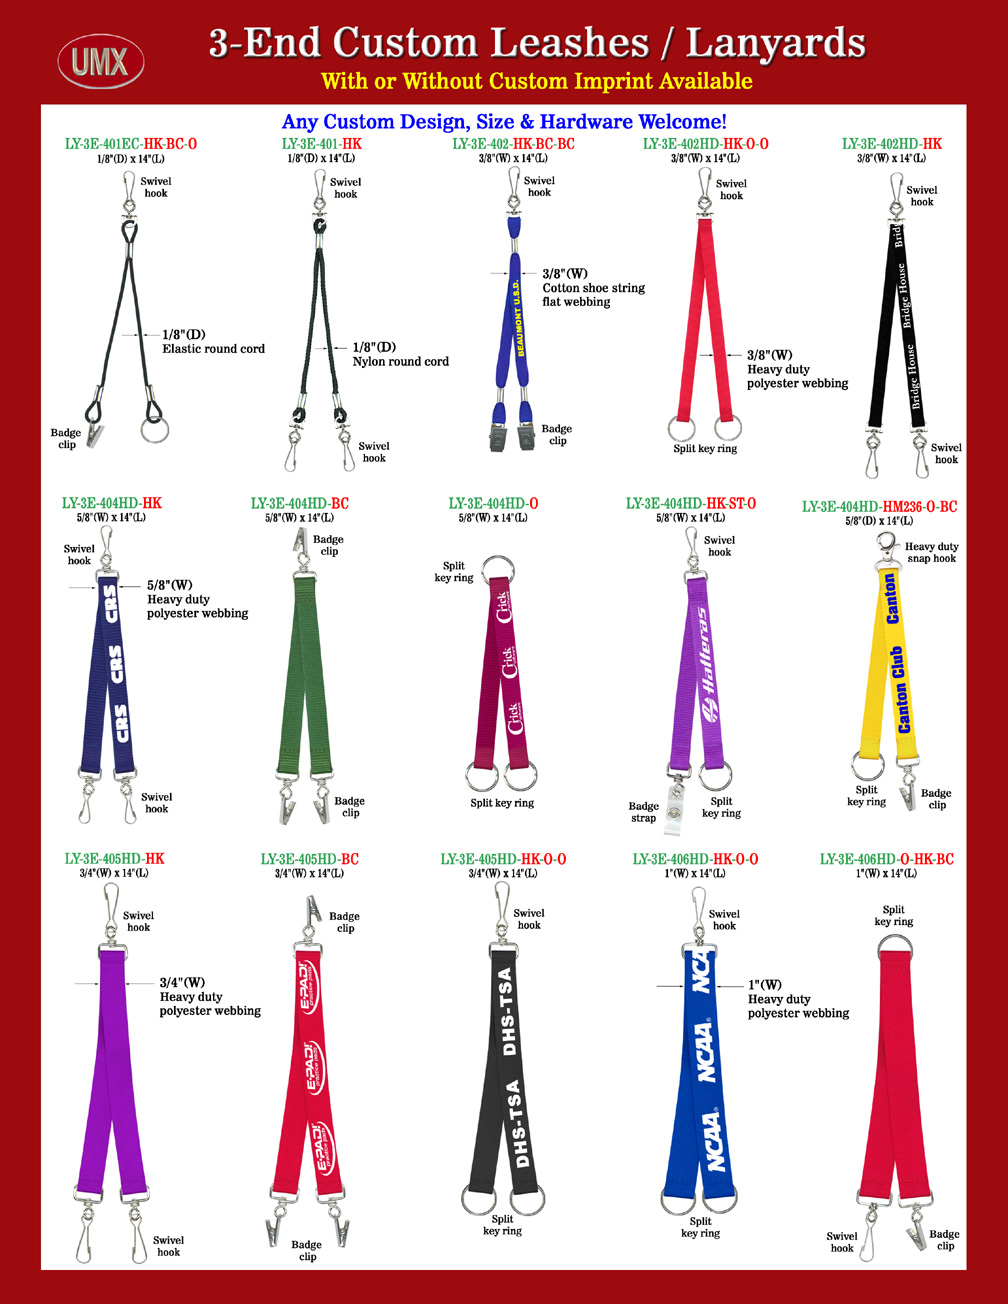 The most popular size of 3-end lanyards are 1/8" round nylon cords, 1/8" elastic cords, 3/8" flat fabric straps either made of cotton or heavy duty polyester, 5/8", 3/4" and 1" flat polyester or nylon webbing.